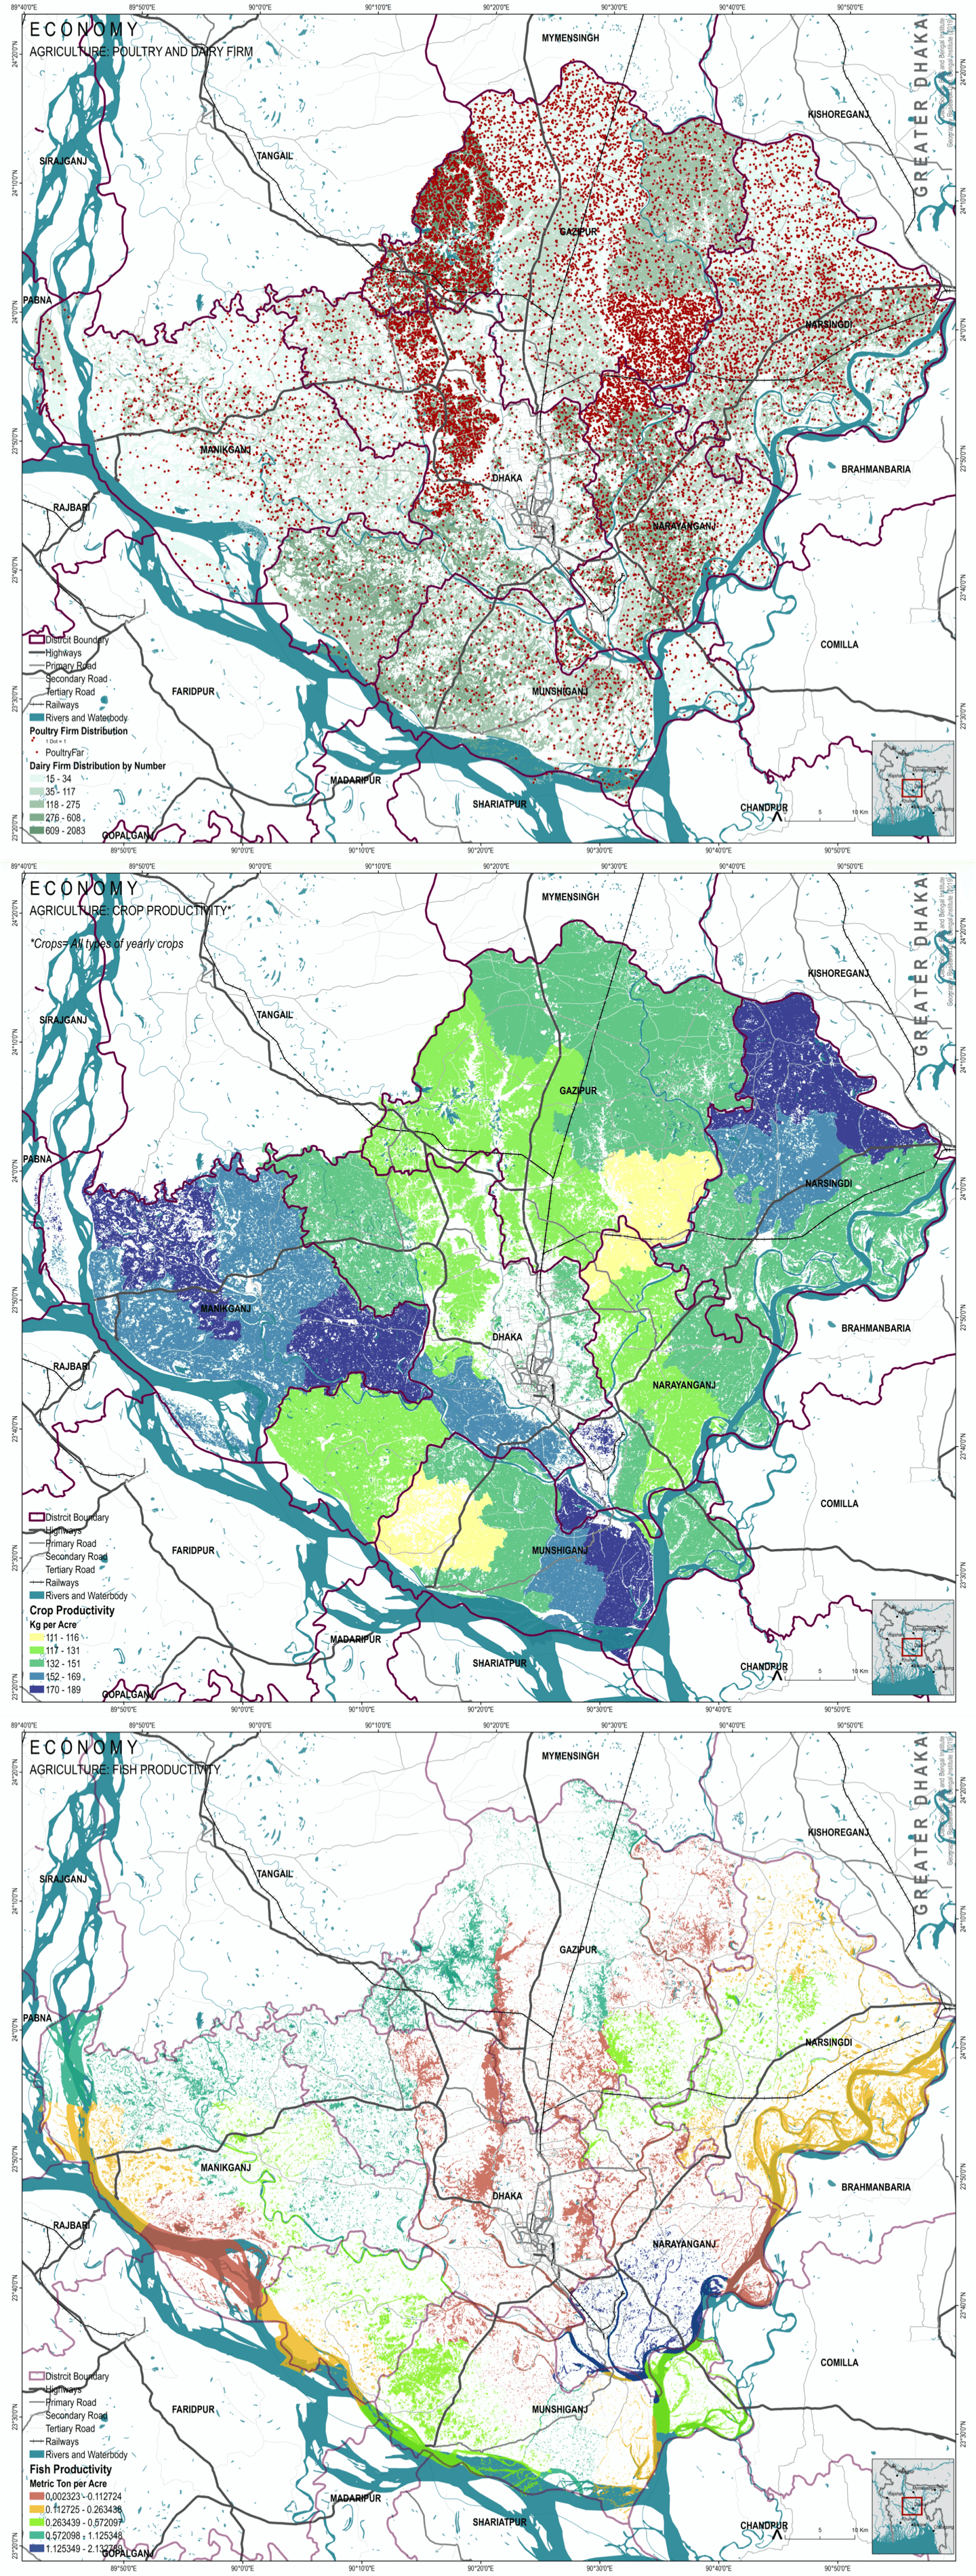 Maps showing distributional patterns of agricultural systems in and around Dhaka